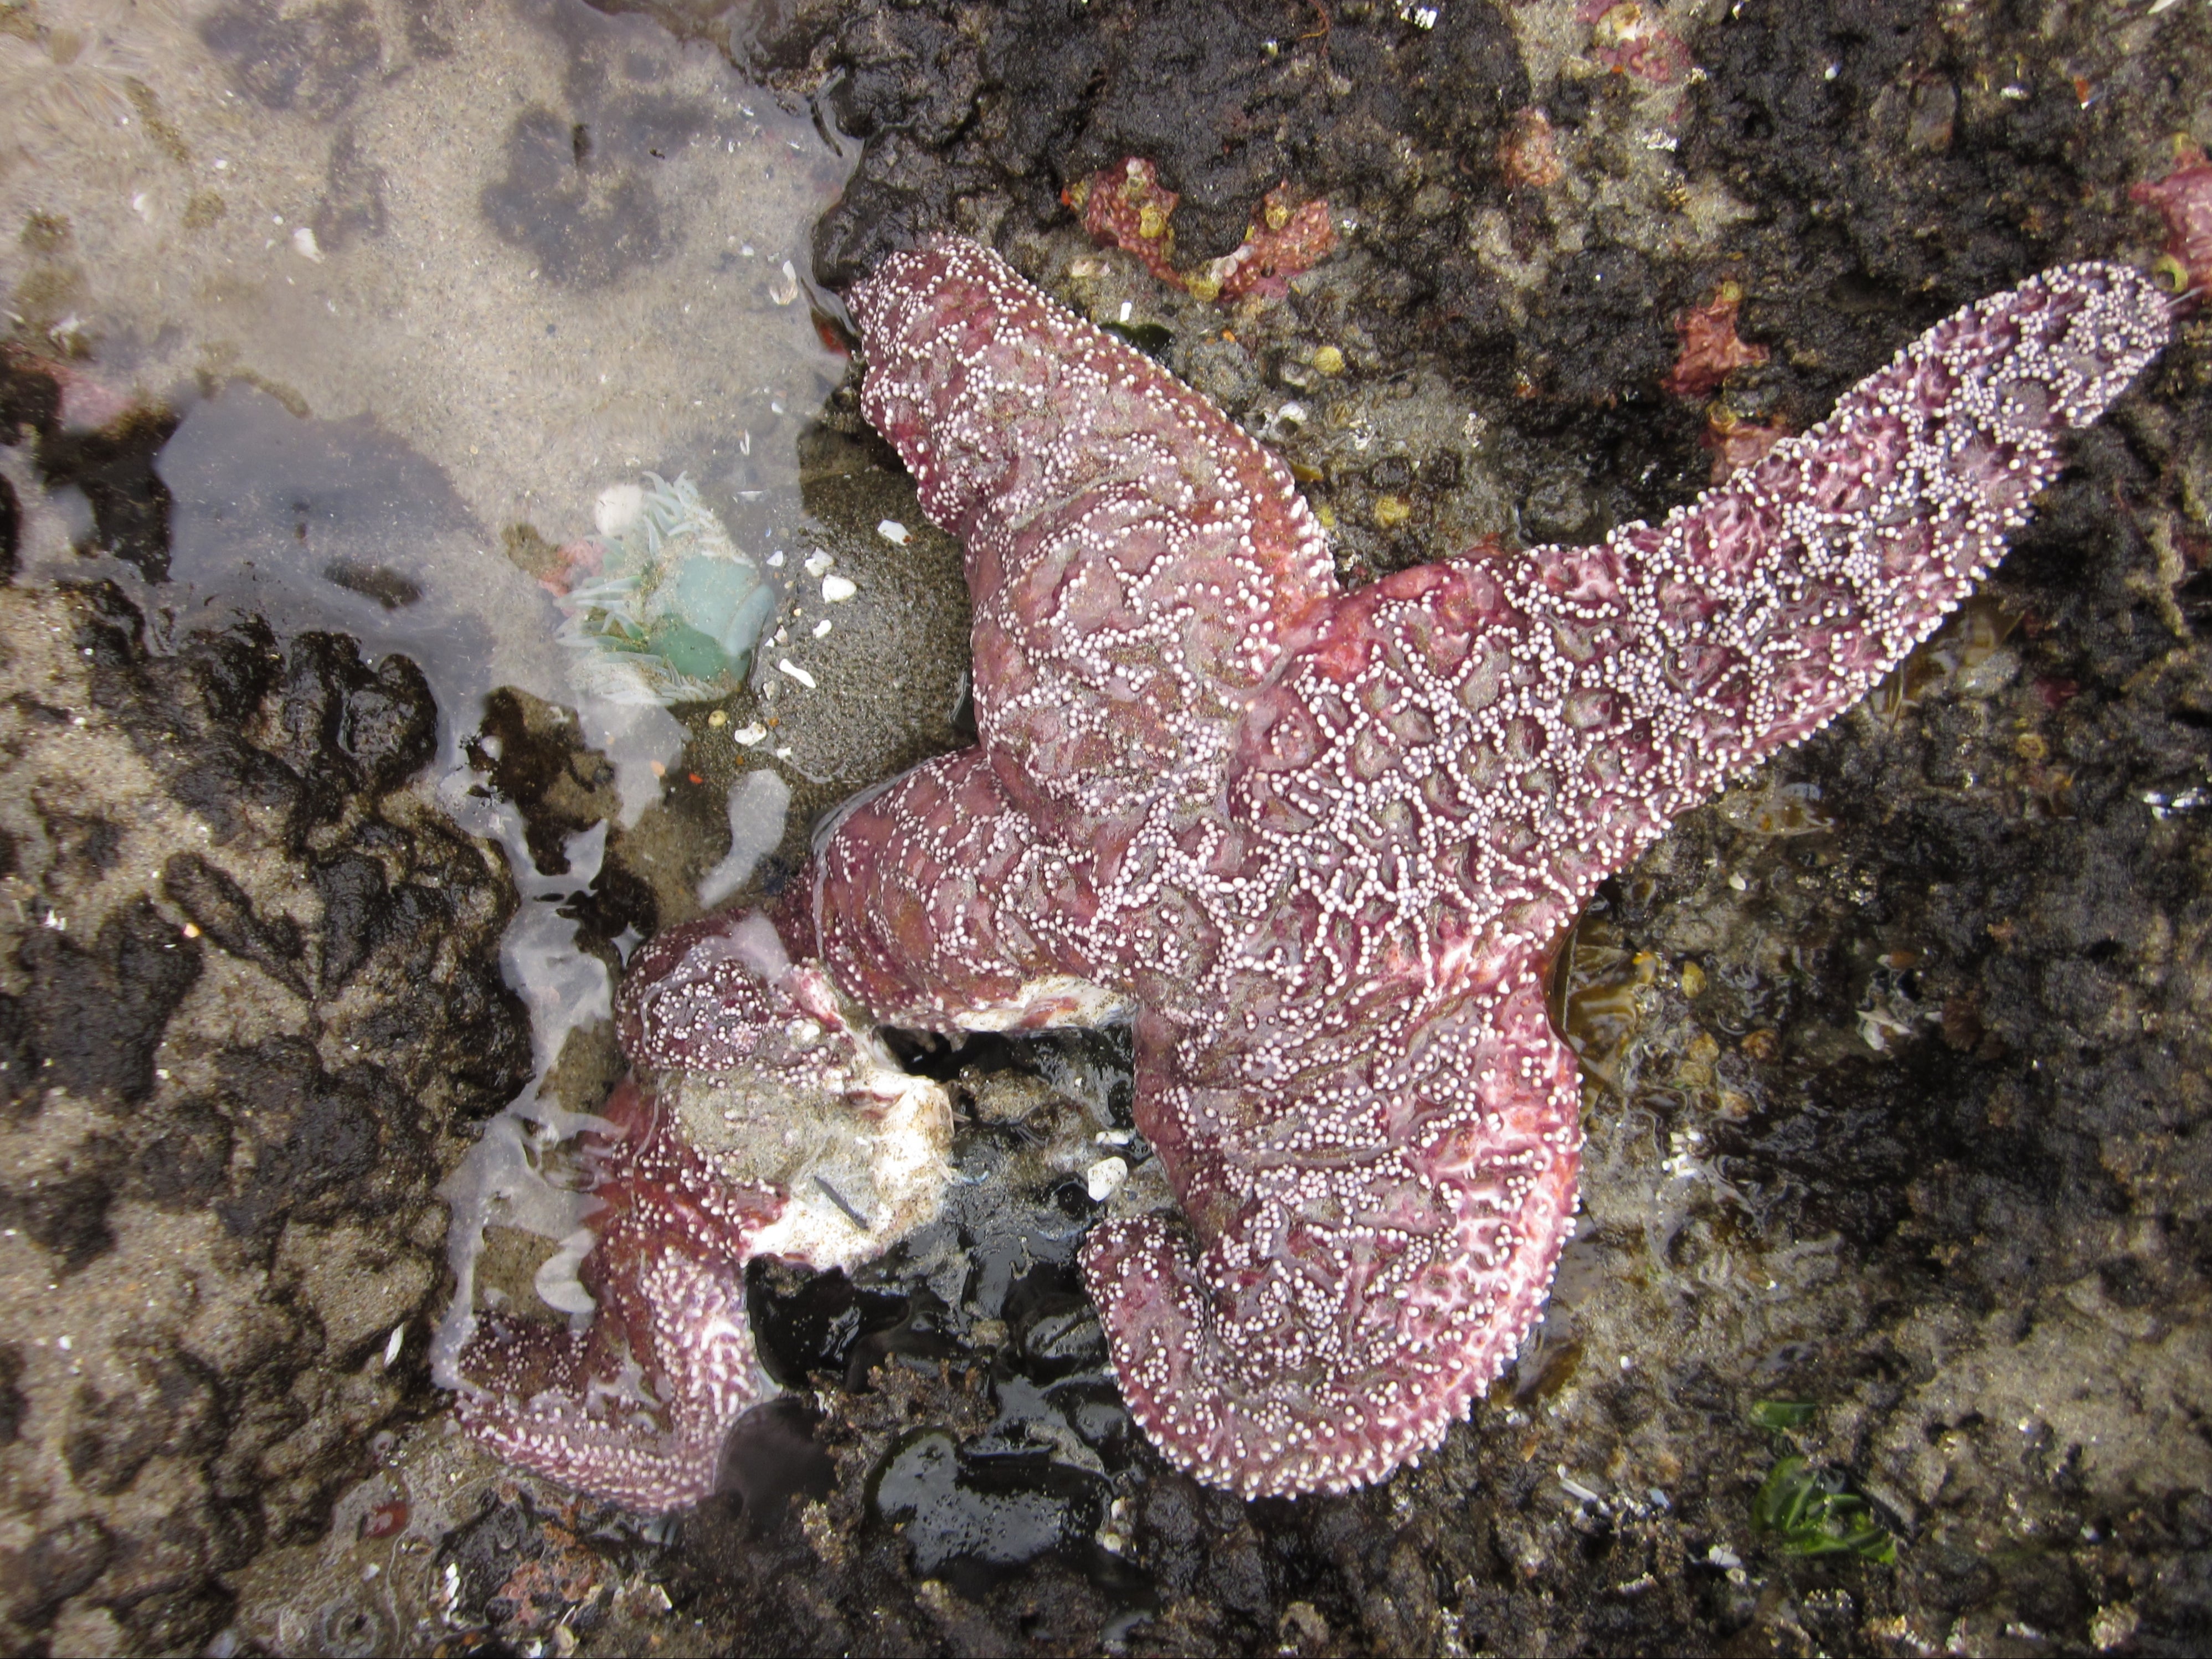 Climate crisis: Warming oceans linked to mass starfish die-offs around the world